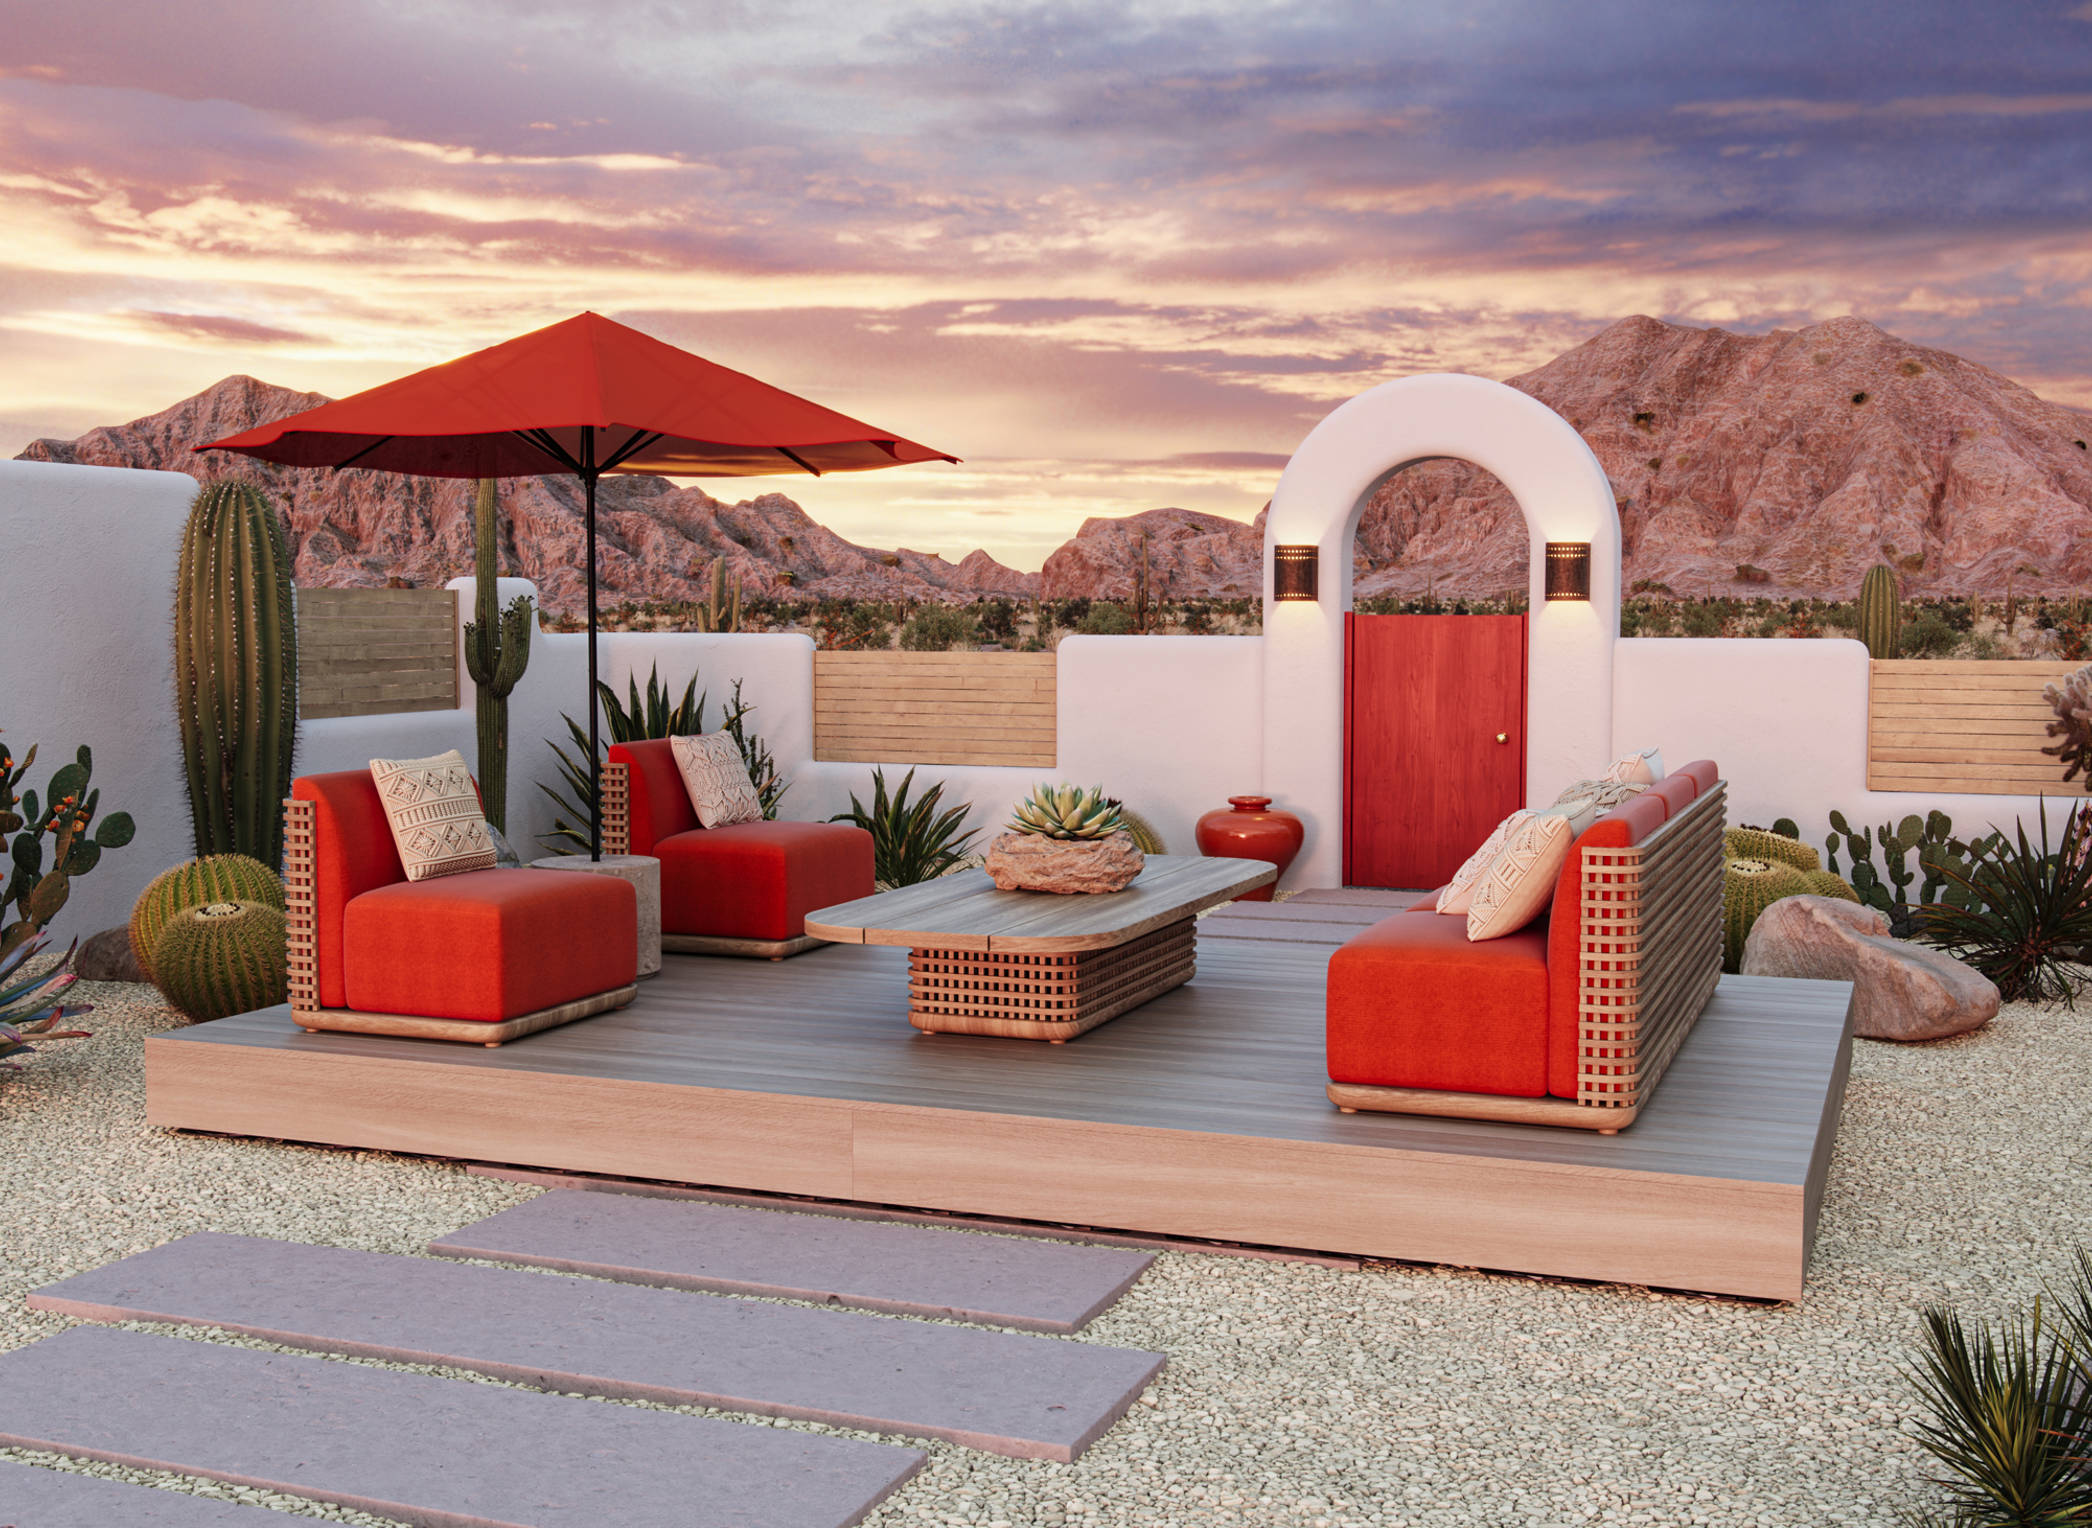 An outdoor patio is shown in this image with orange-cushioned furniture on top of it. There is a path to the deck with the seating area. The patio looks out towards mountains There are cacti and boulders beside the walls of the patio. 